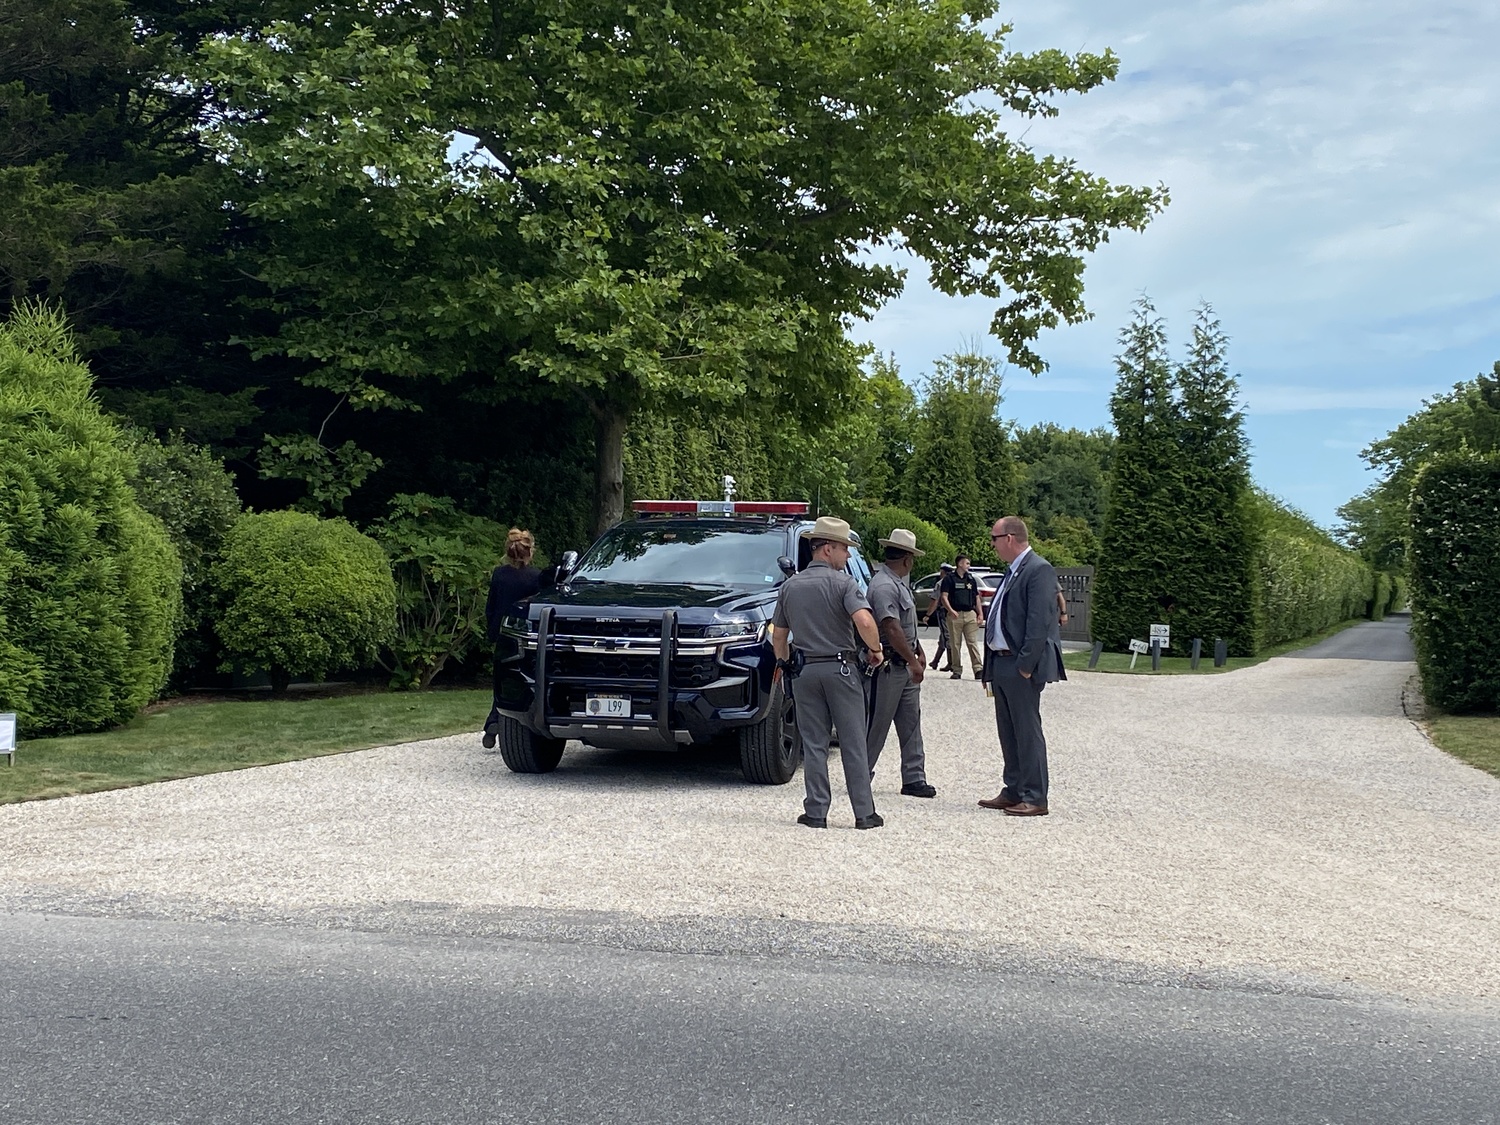 New York State Police and Secret Service personnel kept a close watch on the Further Lane residence where President Biden's reelection campaign held a June 29 fundraiser. CHRISTOPHER WALSH